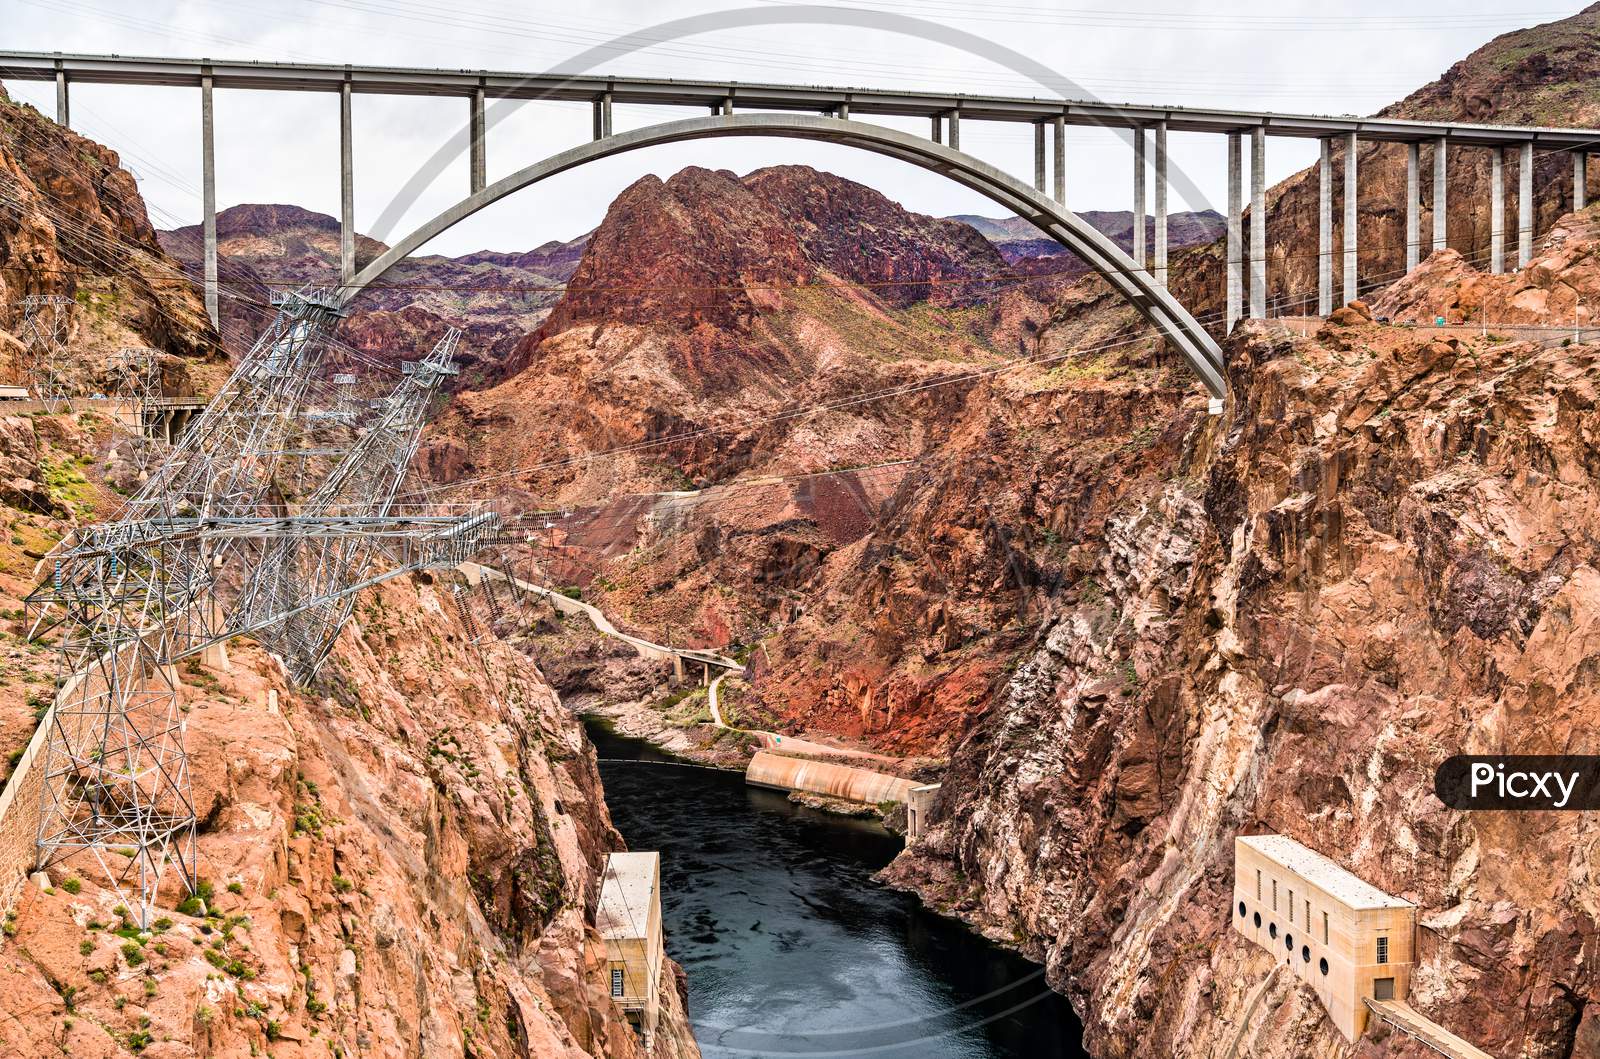 The Hoover Dam Bypass Bridge Across The Colorado River In The United States